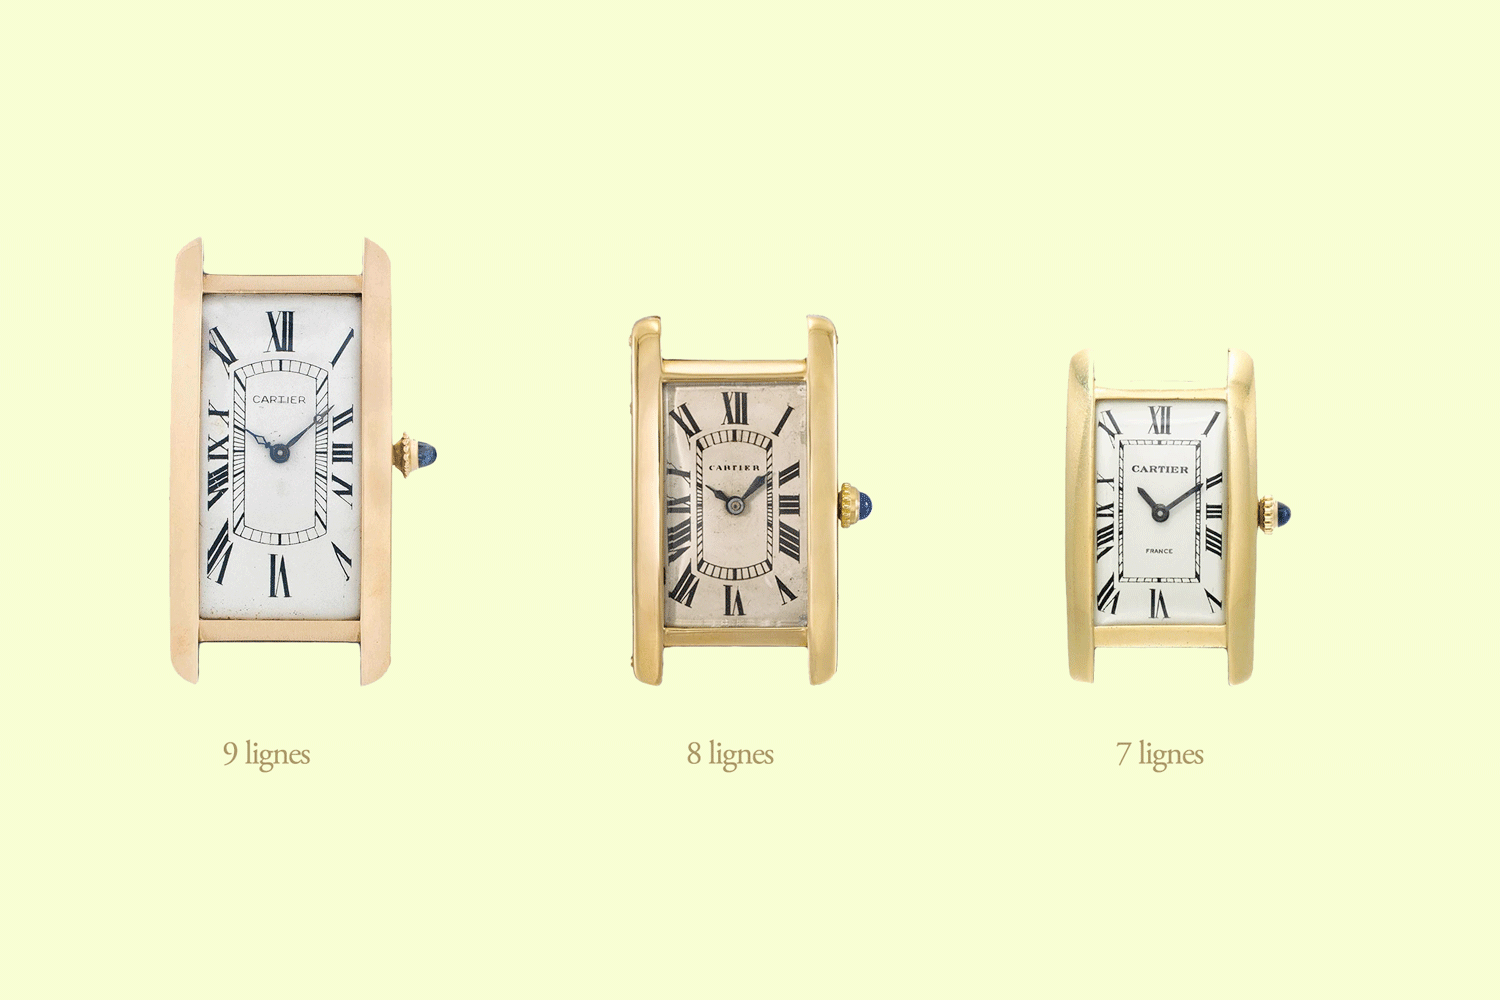 Lignes are a unit of measurement for watch movements with one ligne equaling 2.25mm or 1mm being the equivalent of 0.44 lignes; modern scholarship suggests that the Tank Cintrée was made in three size variations, as seen above for comparison, determined by the movement sizes used within (Graphic recreated from acollectedman.com)